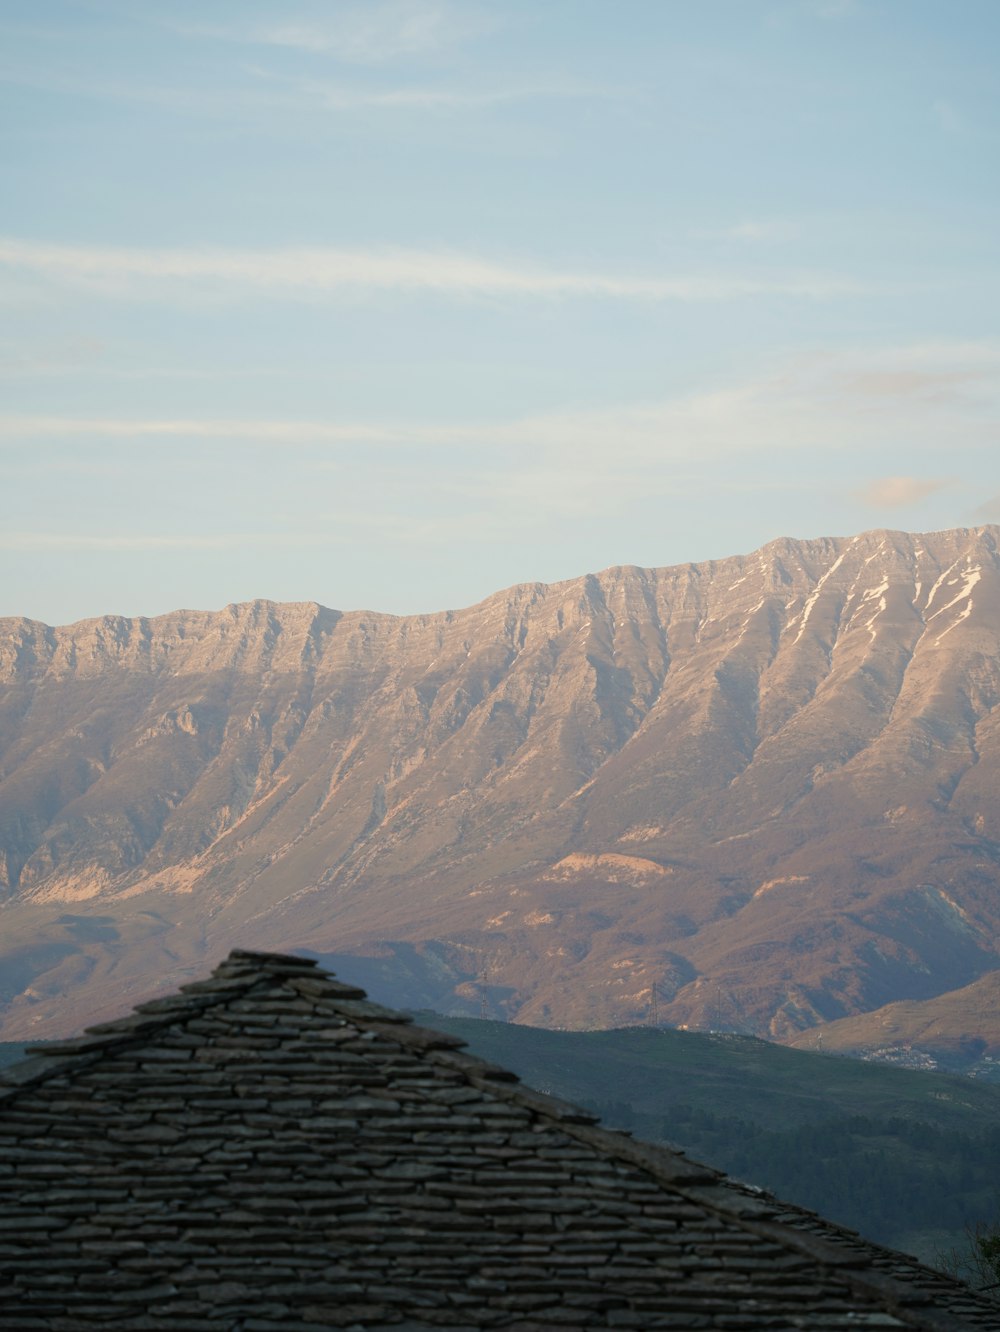 a view of a mountain range from a roof